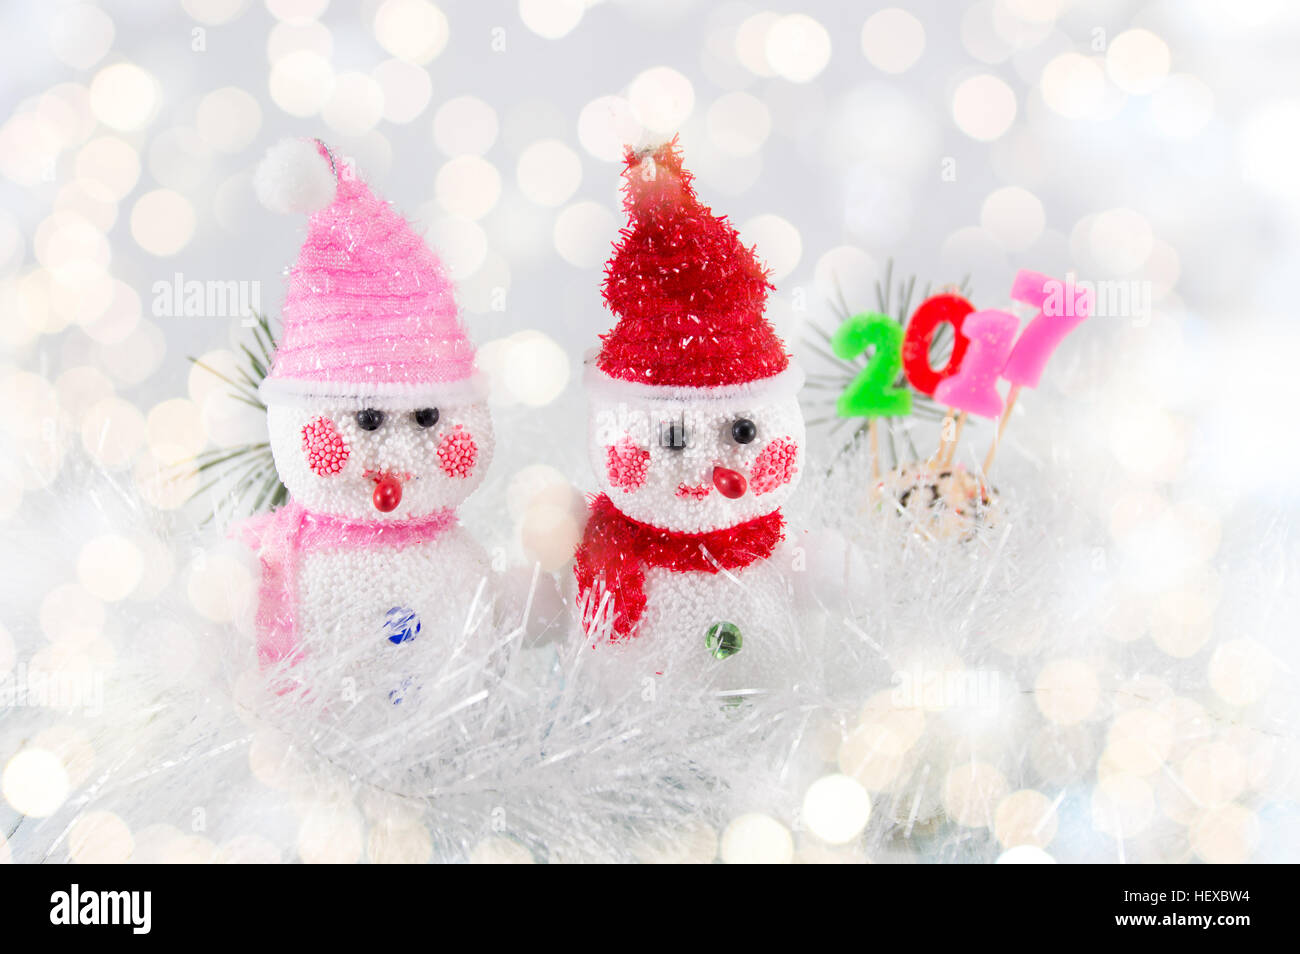 Two toy snowman with 2017 sign and festive Christmas background Stock Photo